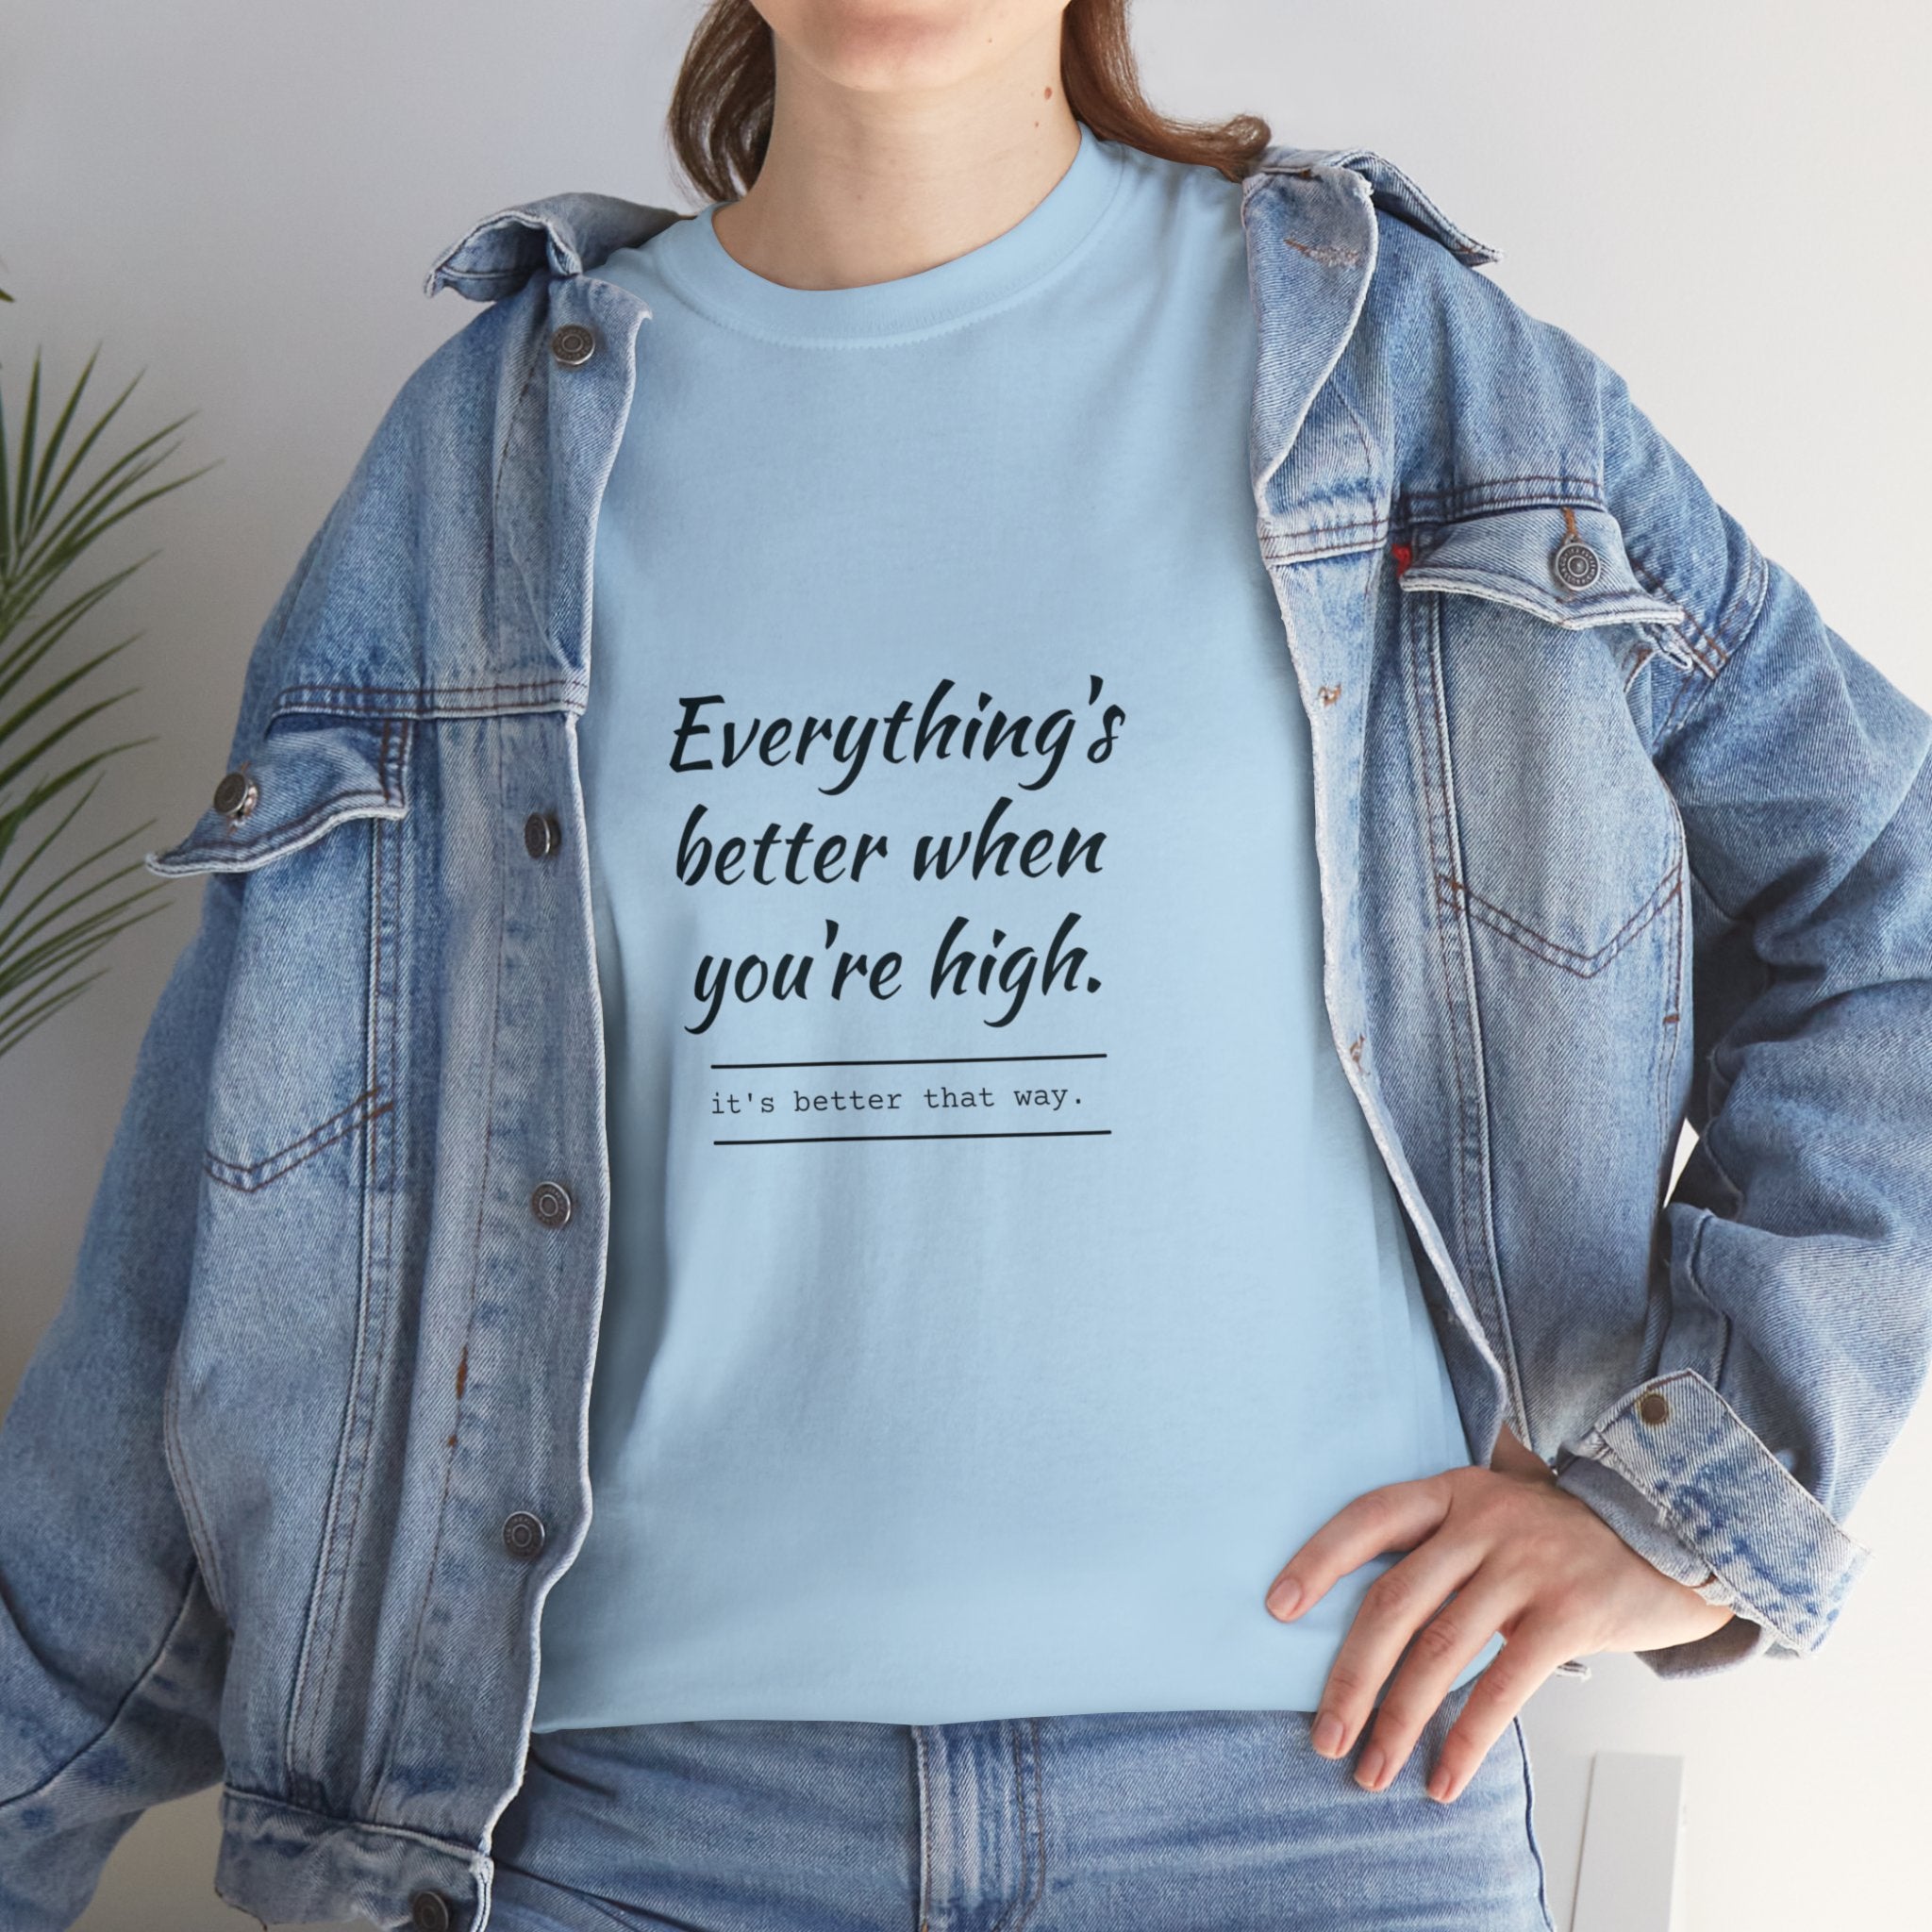 Everything is better when you're high tee - TRU2 Clothing